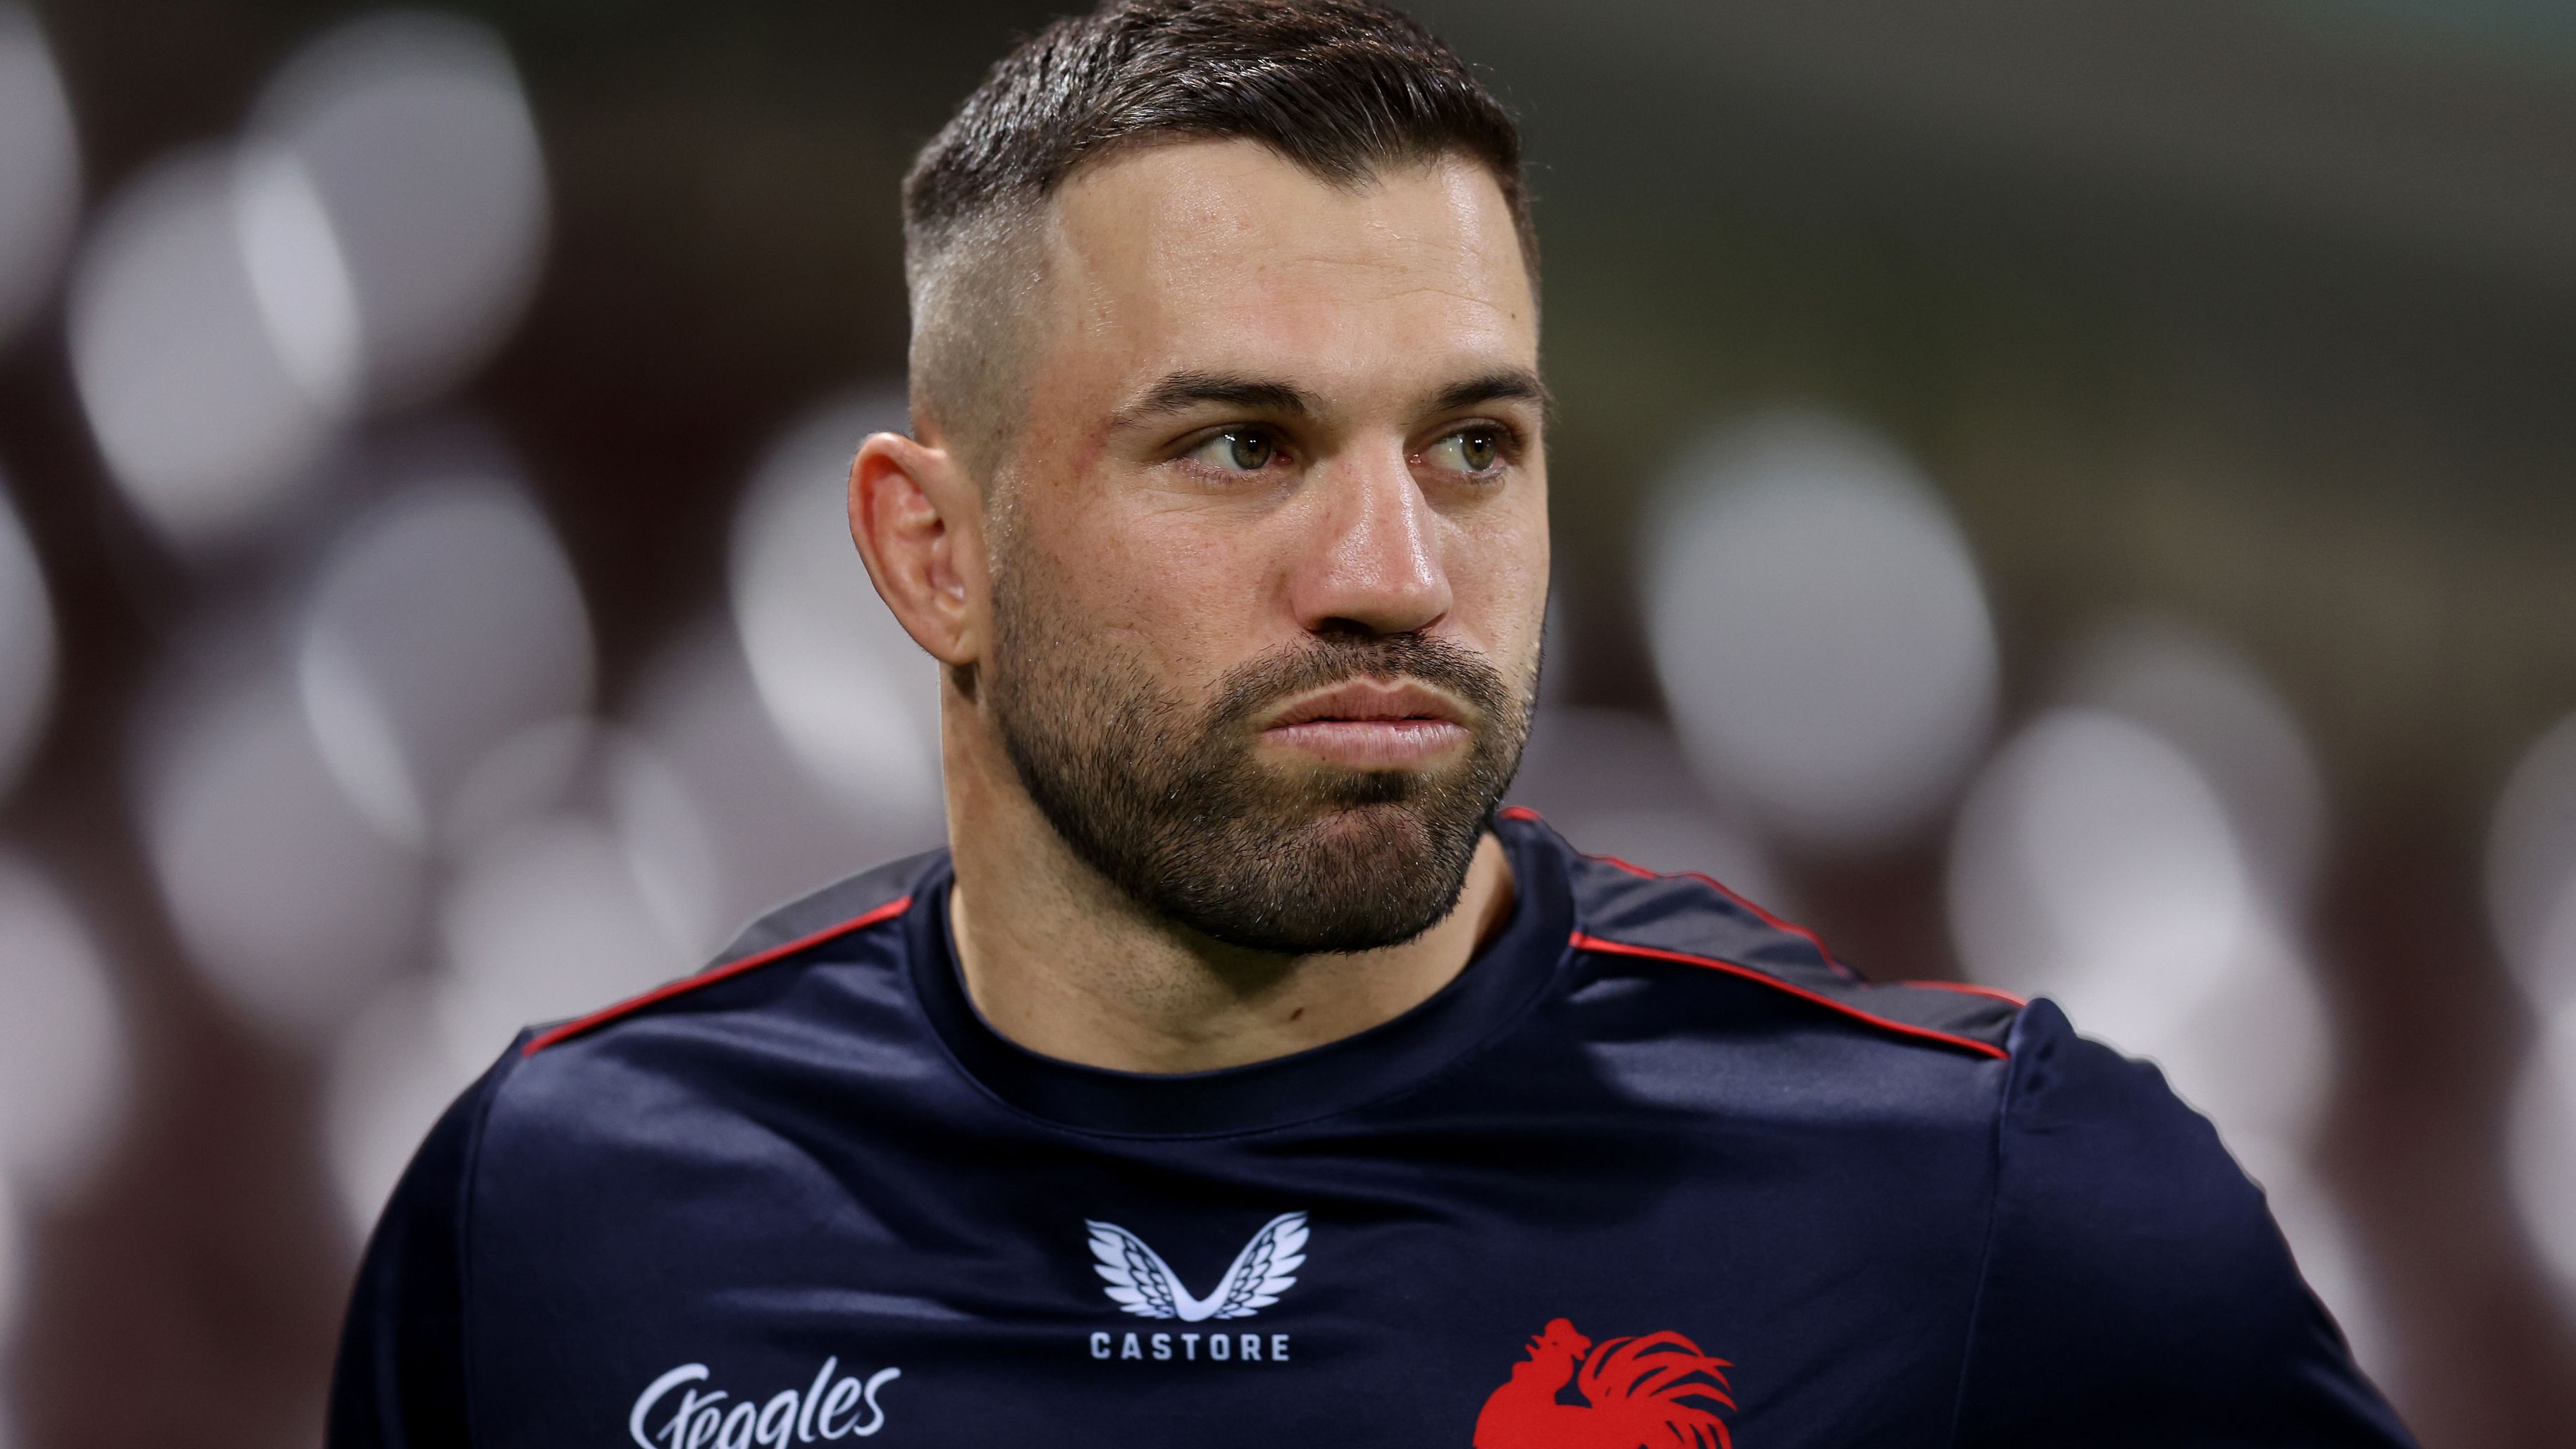 James Tedesco of the Roosters prior to the start of play during the round 23 NRL match between the Sydney Roosters and the Wests Tigers at Sydney Cricket Ground, on August 20, 2022, in Sydney, Australia. (Photo by Scott Gardiner/Getty Images)